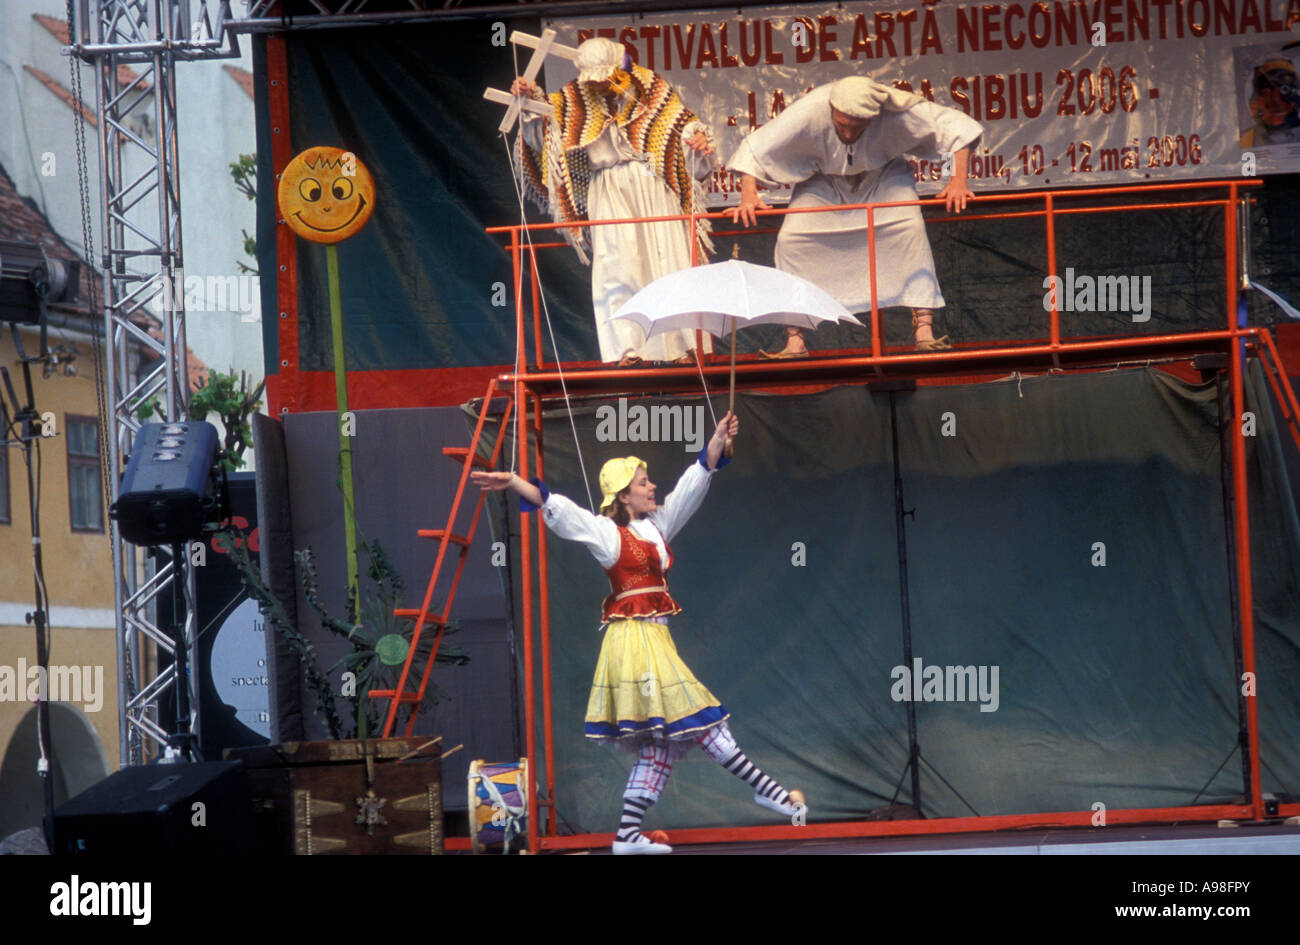 A woman acts as a marionette during a show in Sibiu, Romania. The string  pullers and the stage are also shown Stock Photo - Alamy